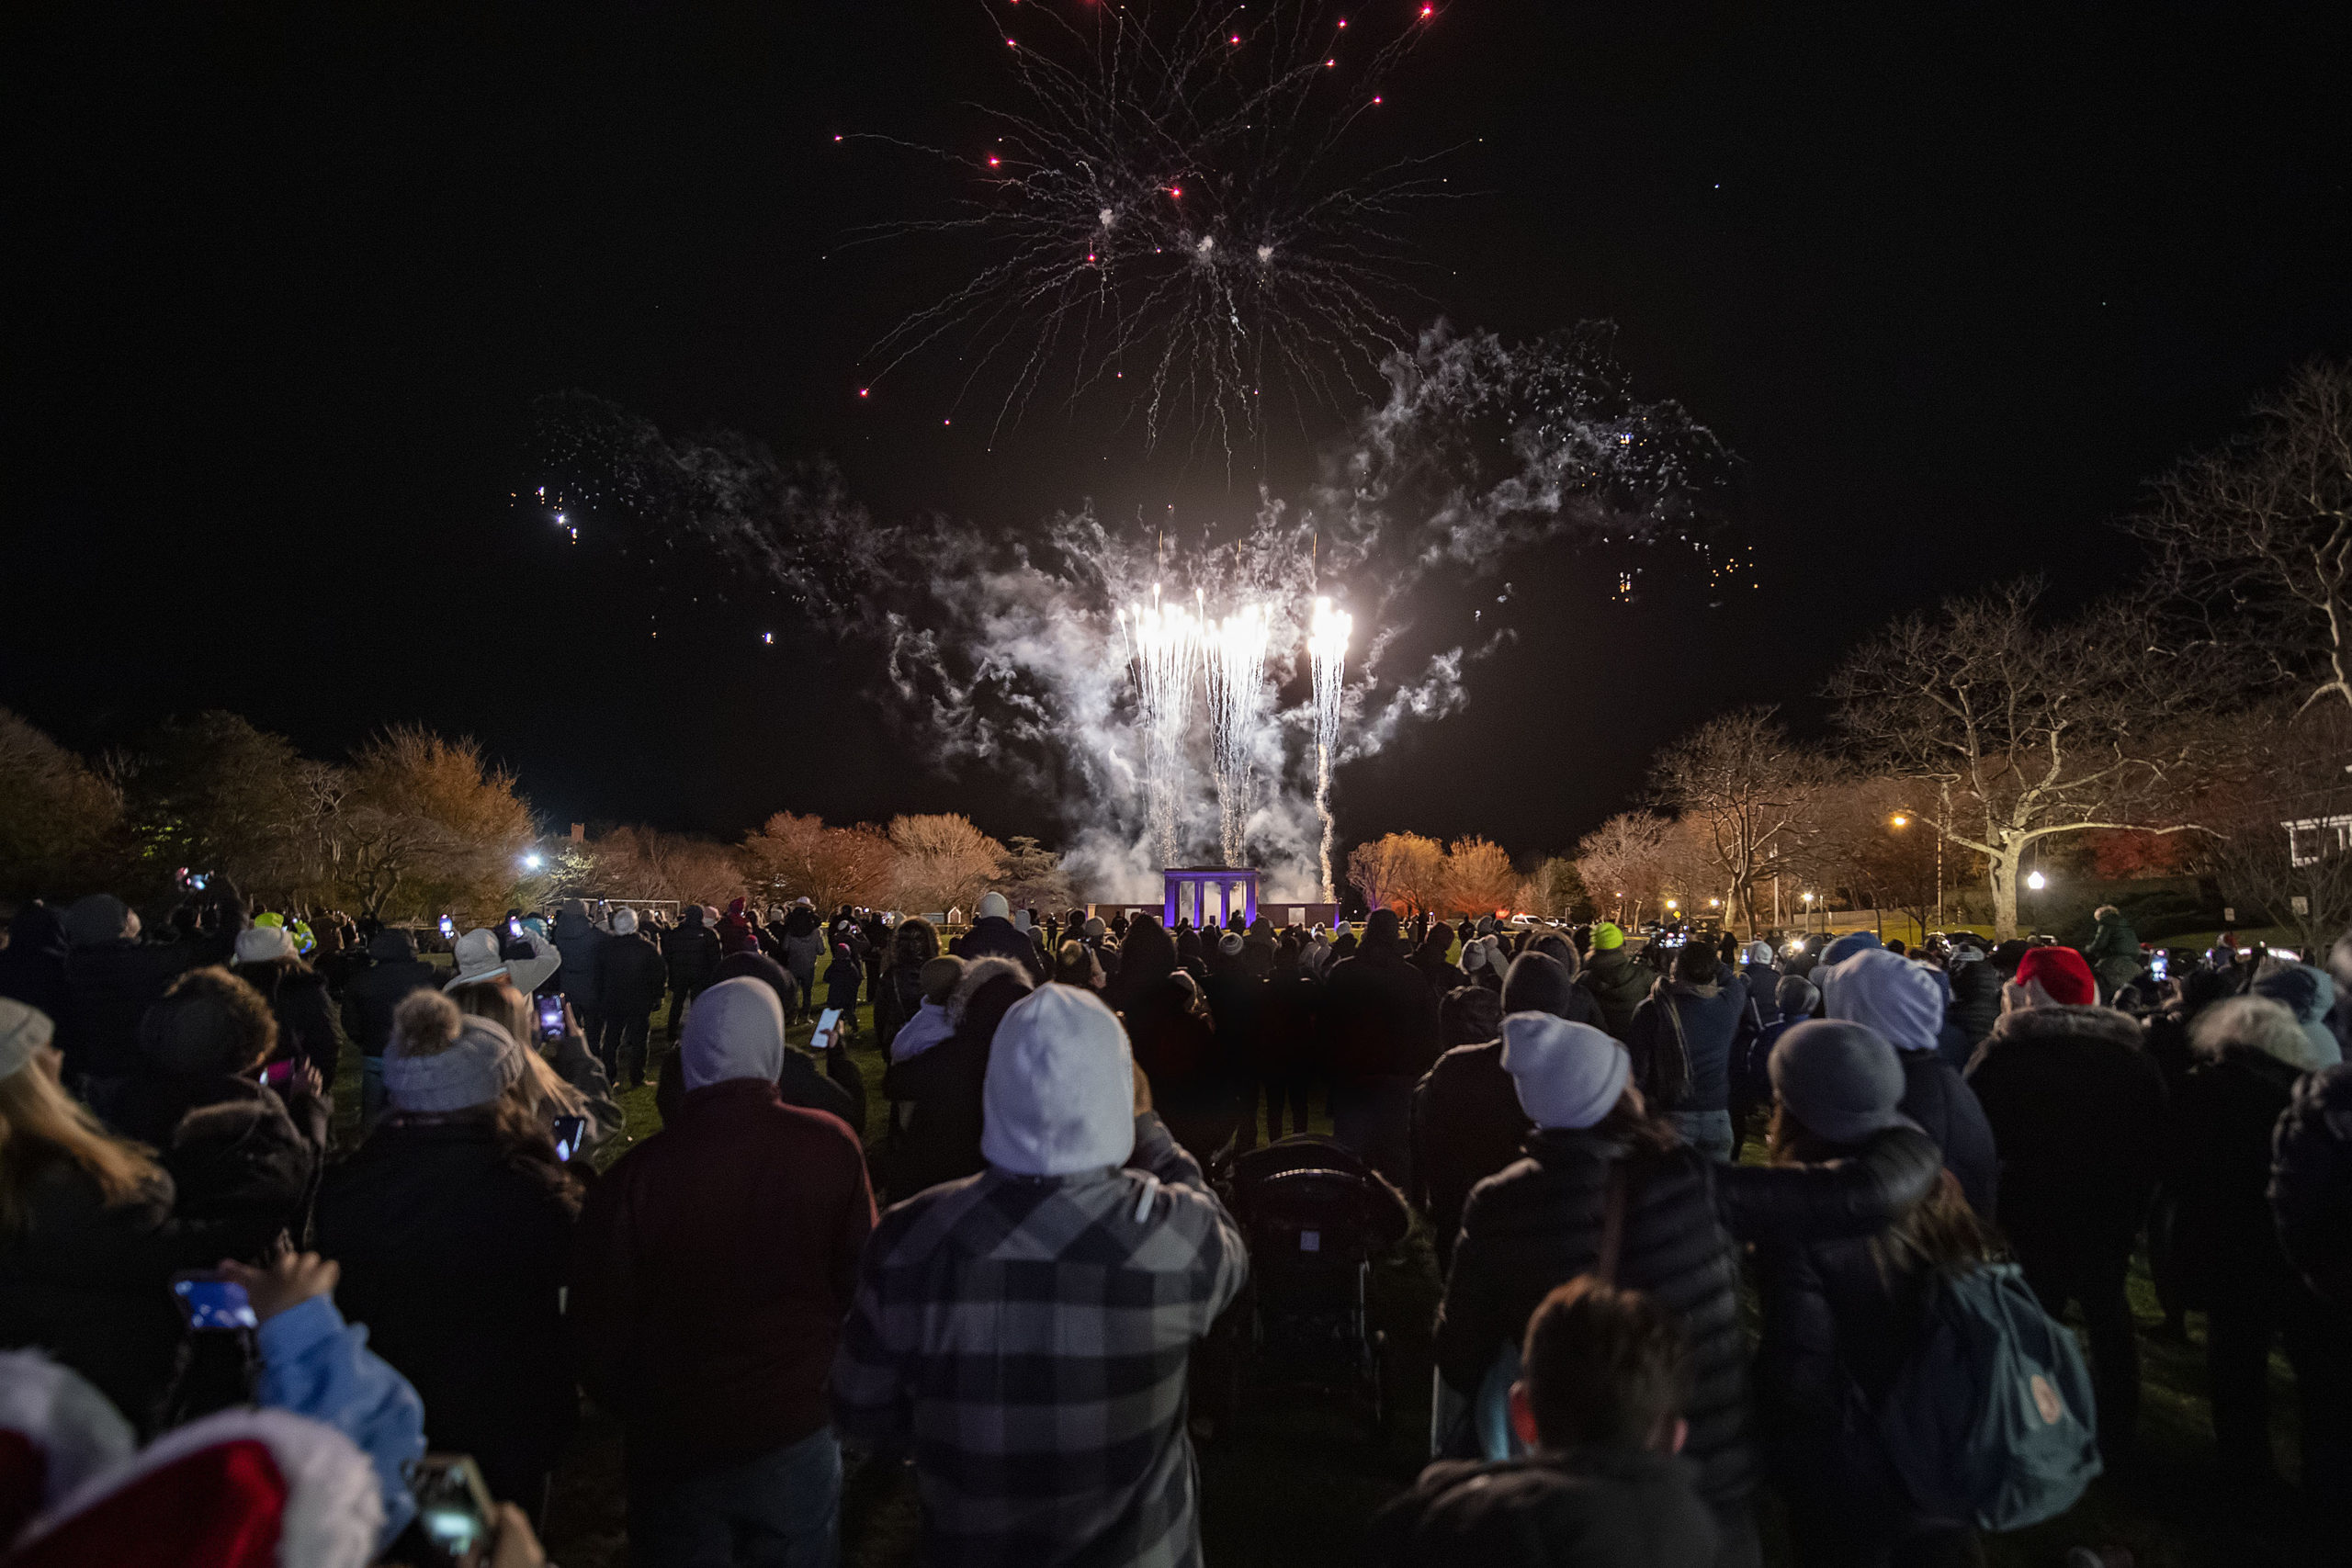 The crowd watches fireworks launched from behind the monument in Agawam Park on Saturday night.  MICHAEL HELLER